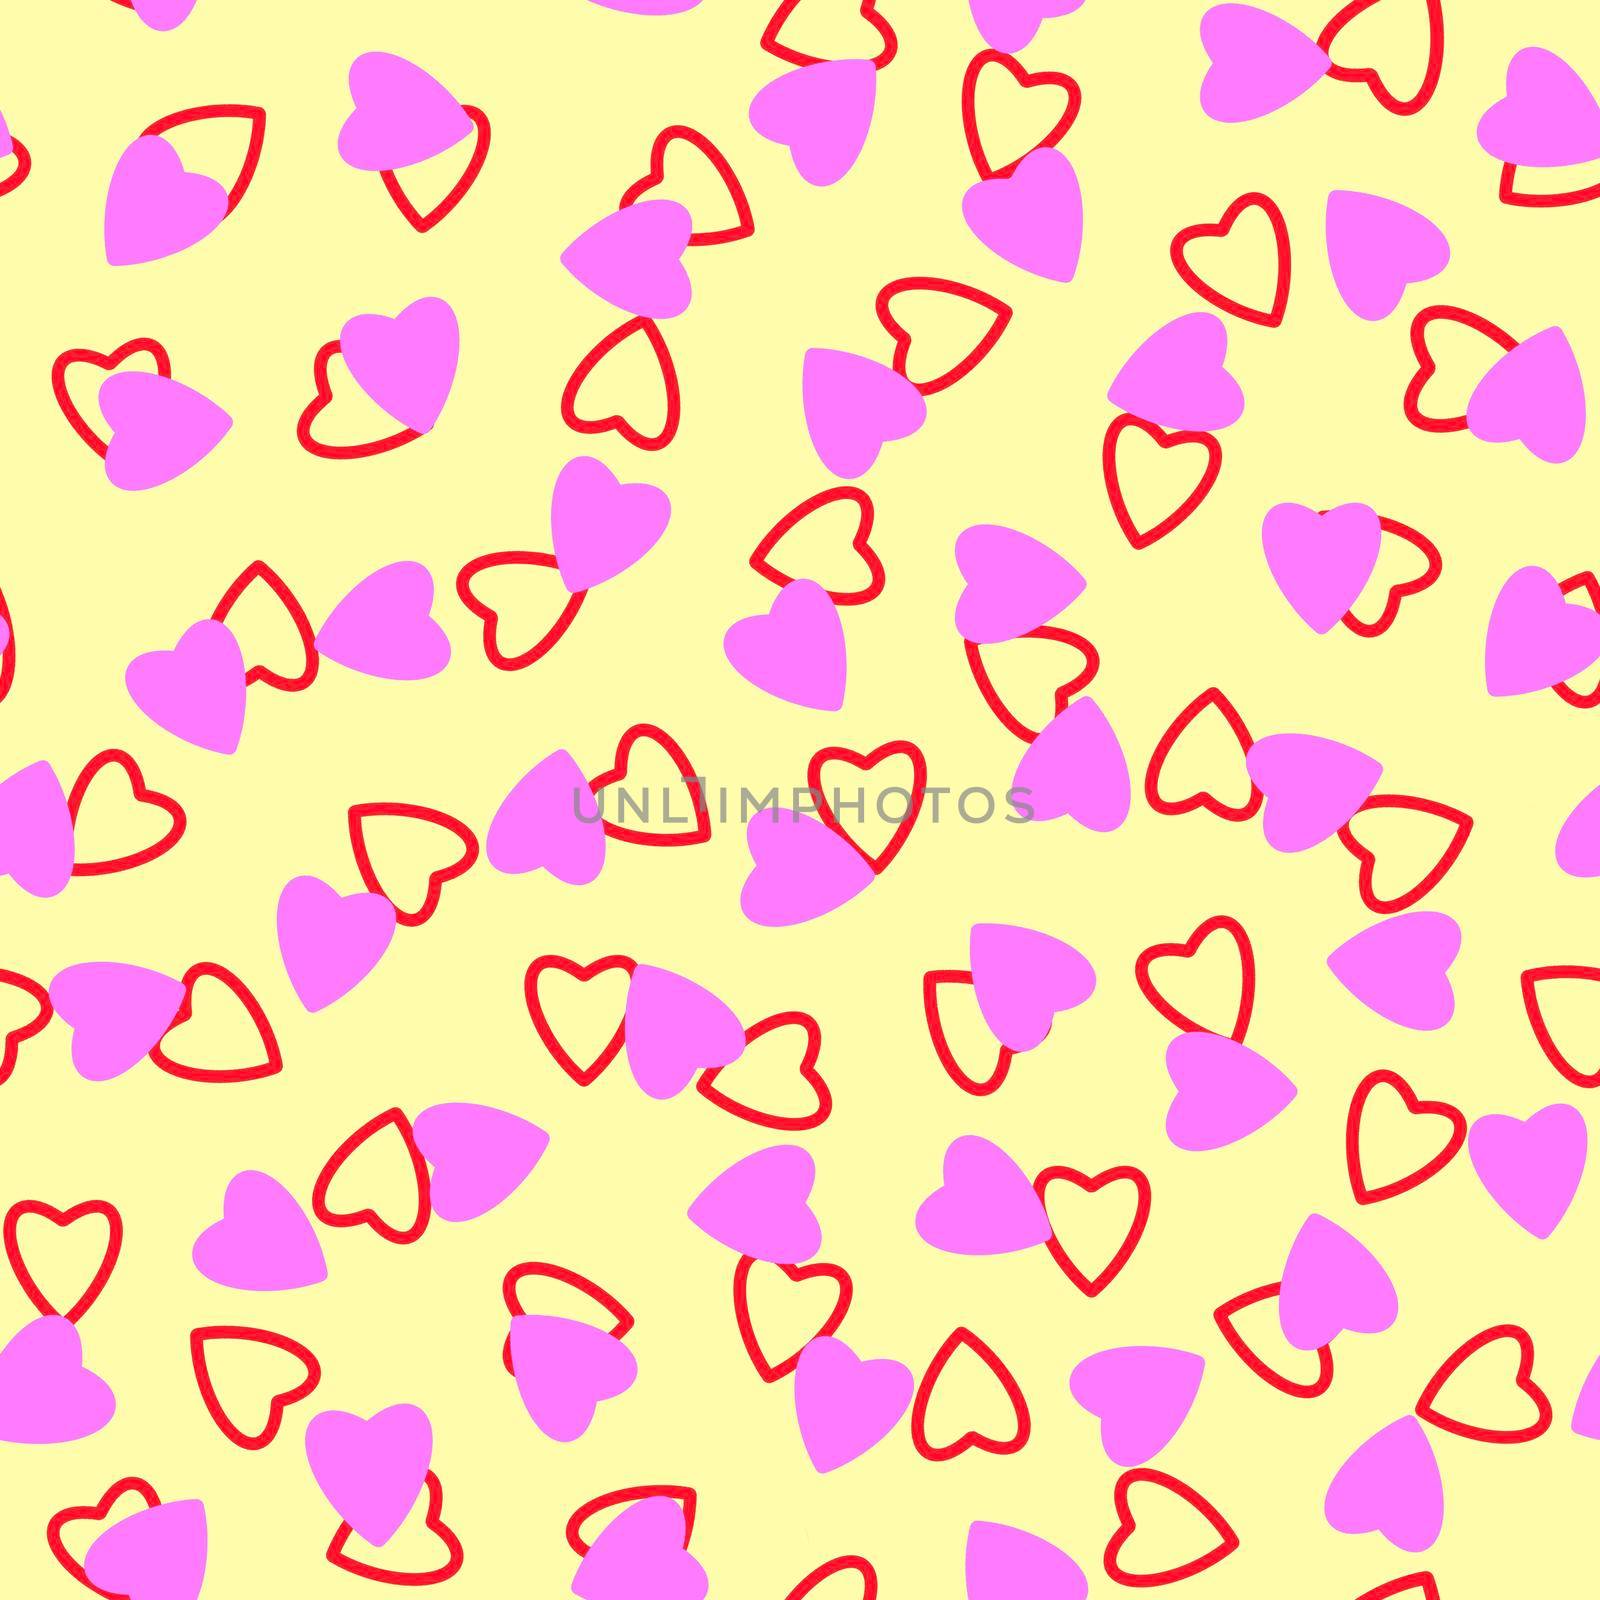 Simple hearts seamless pattern,endless chaotic texture made of tiny heart silhouettes.Valentines,mothers day background.Great for Easter,wedding,scrapbook,gift wrapping paper,textiles.Lilac,red,ivory.